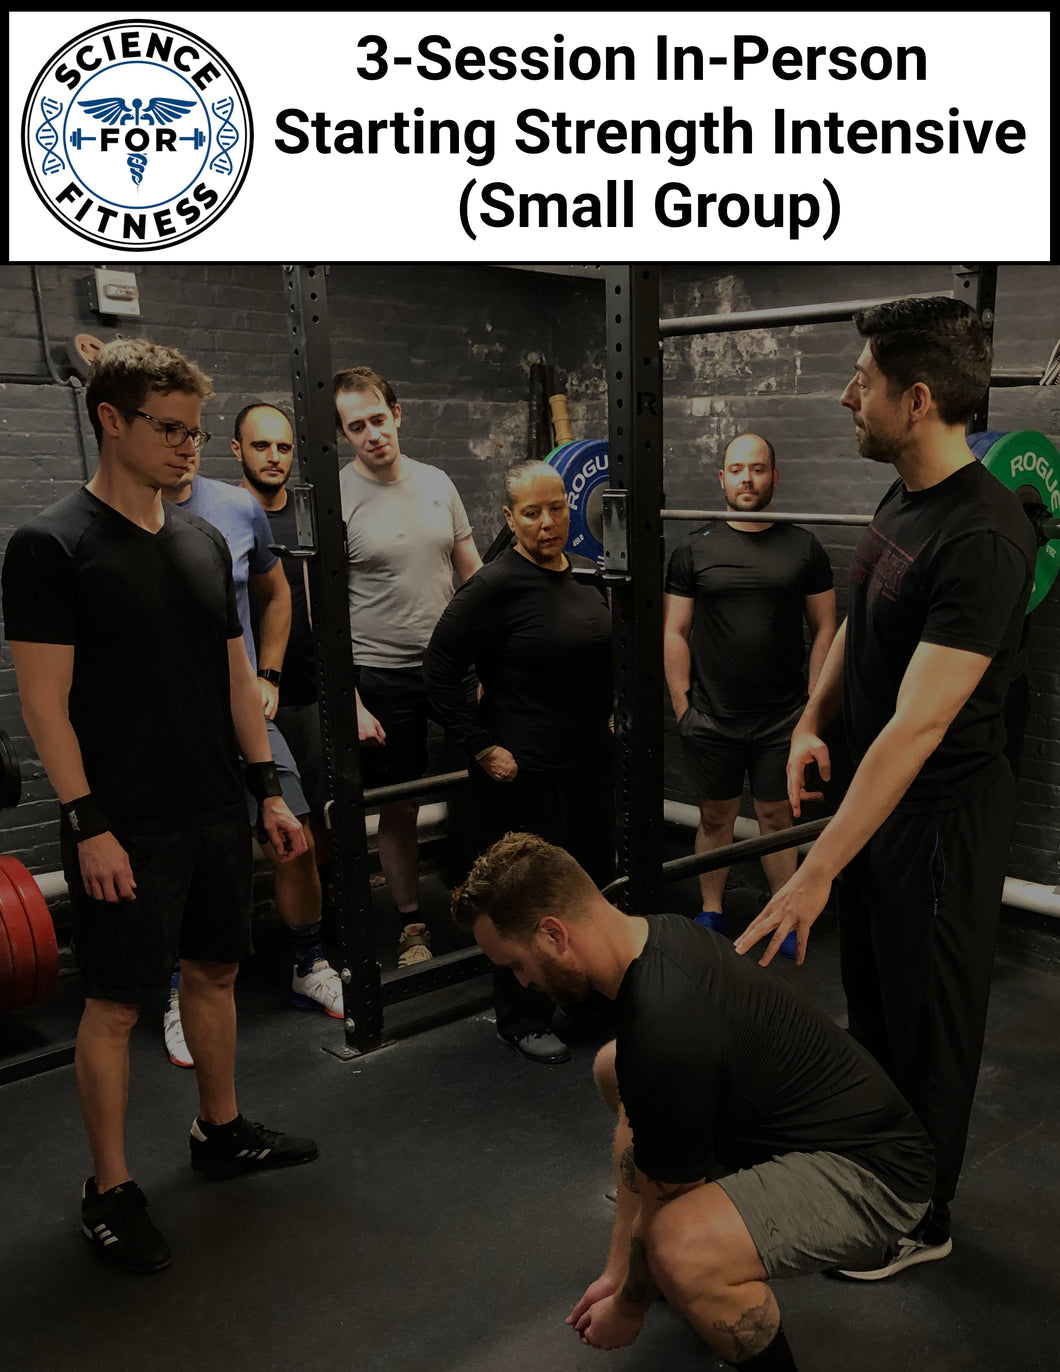 3-Session In-Person Starting Strength Intensive (Small Group)